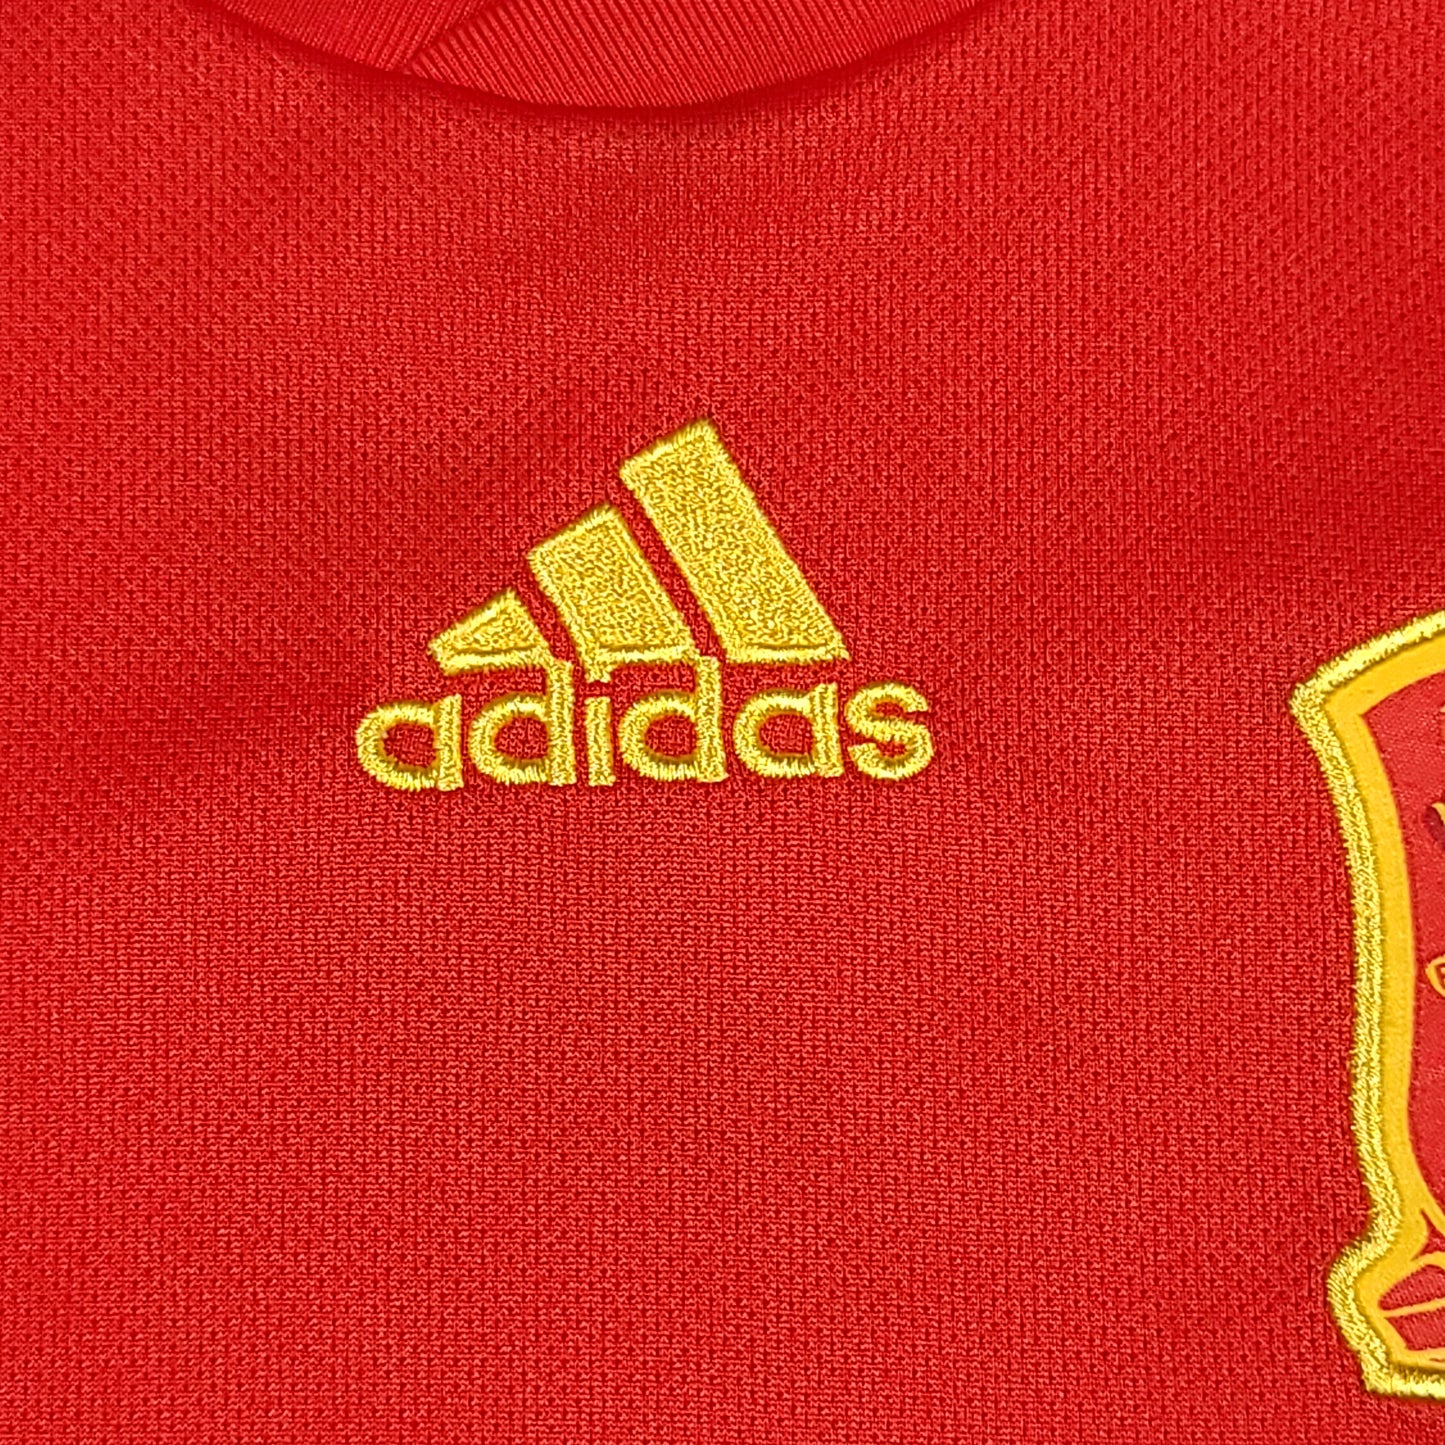 Spain 2018 adidas Red Home Soccer Jersey